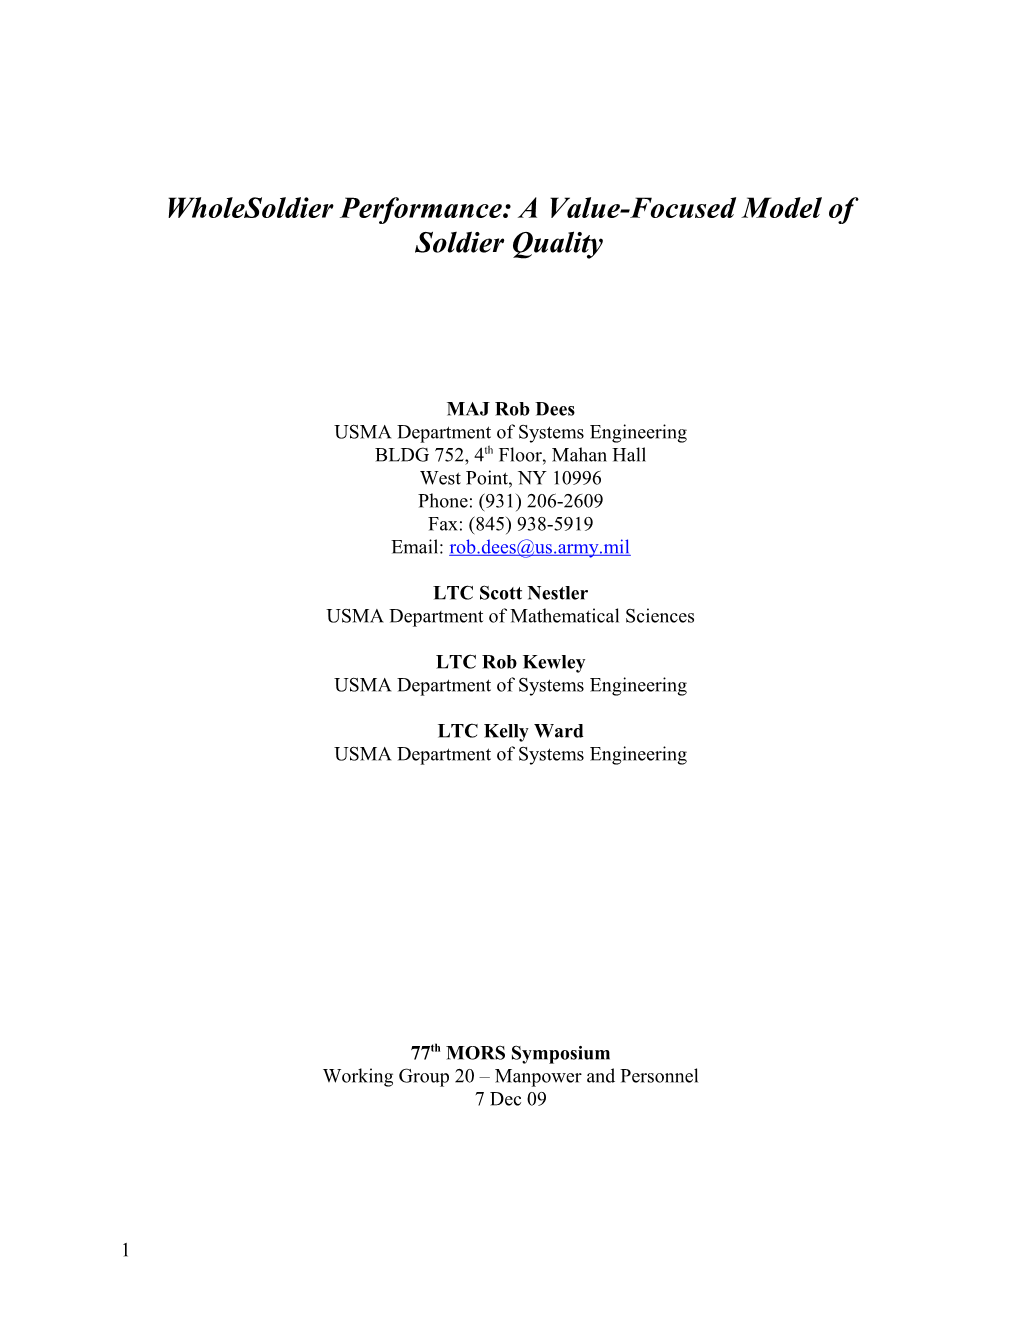 Wholesoldier Performance: a Value-Focused Model of Soldier Quality